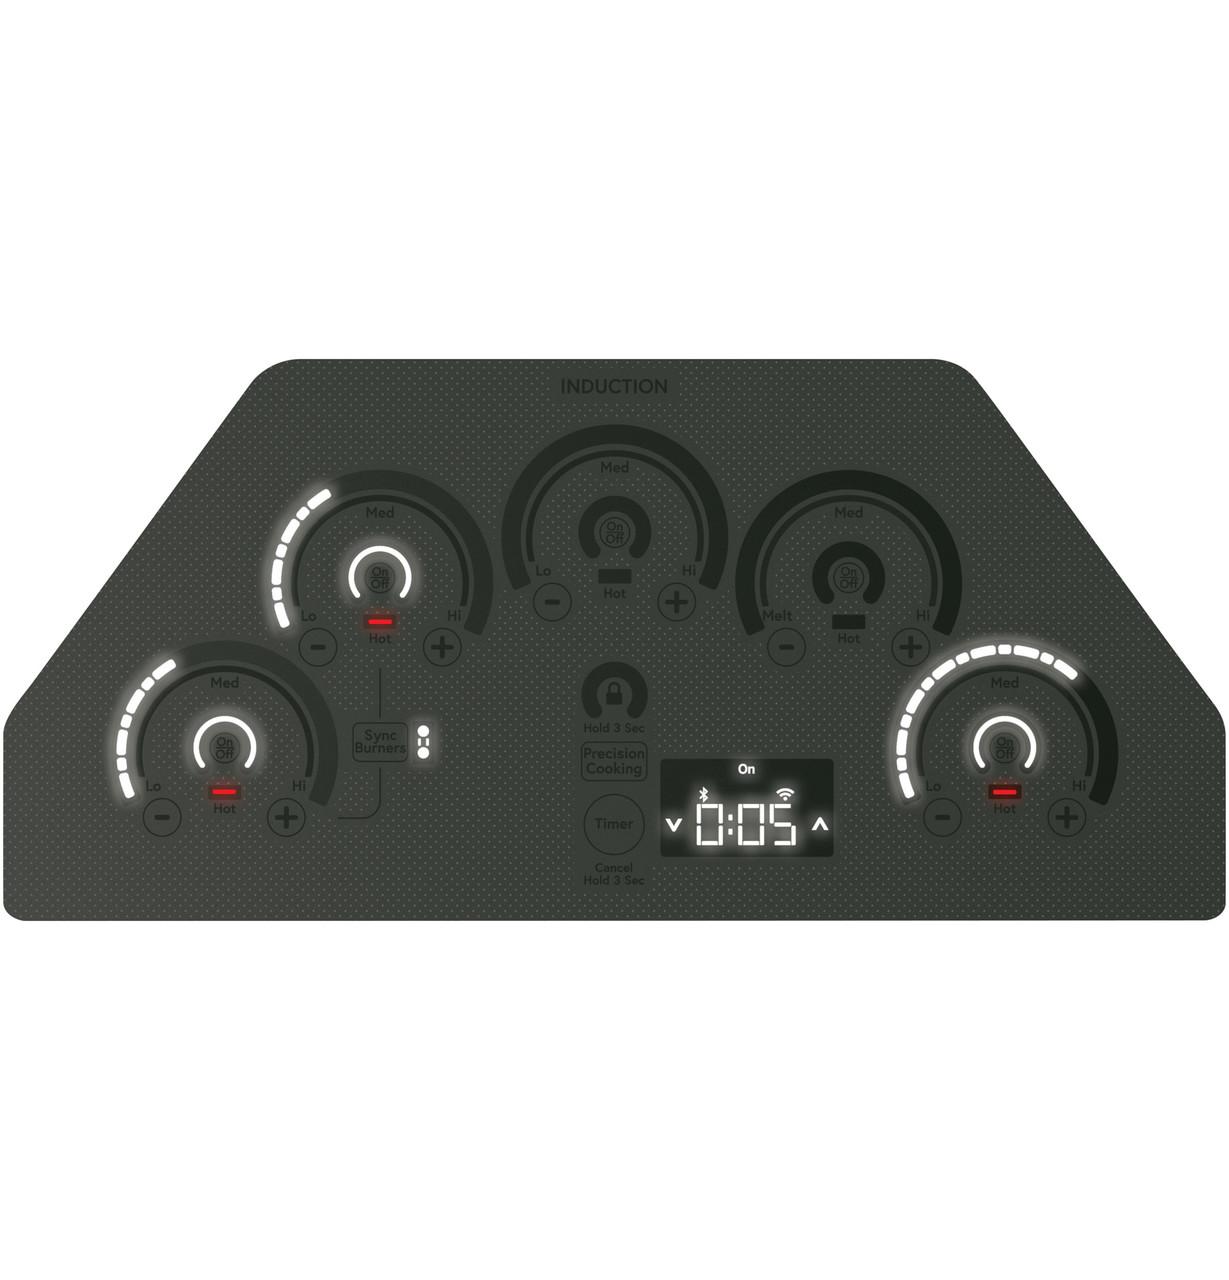 Caf(eback)™ 36" Smart Touch-Control Induction Cooktop